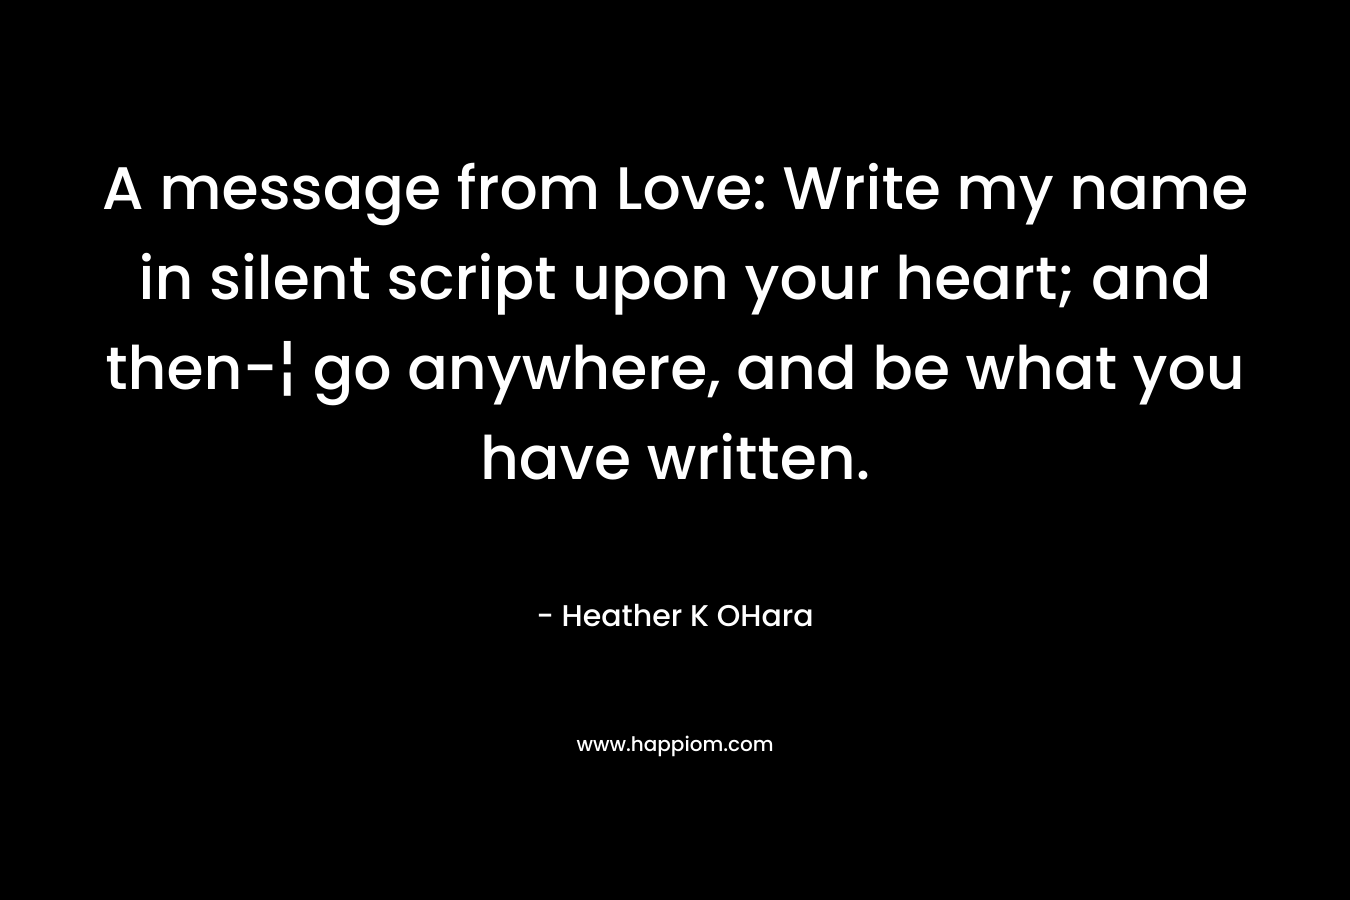 A message from Love: Write my name in silent script upon your heart; and then-¦ go anywhere, and be what you have written. – Heather K OHara